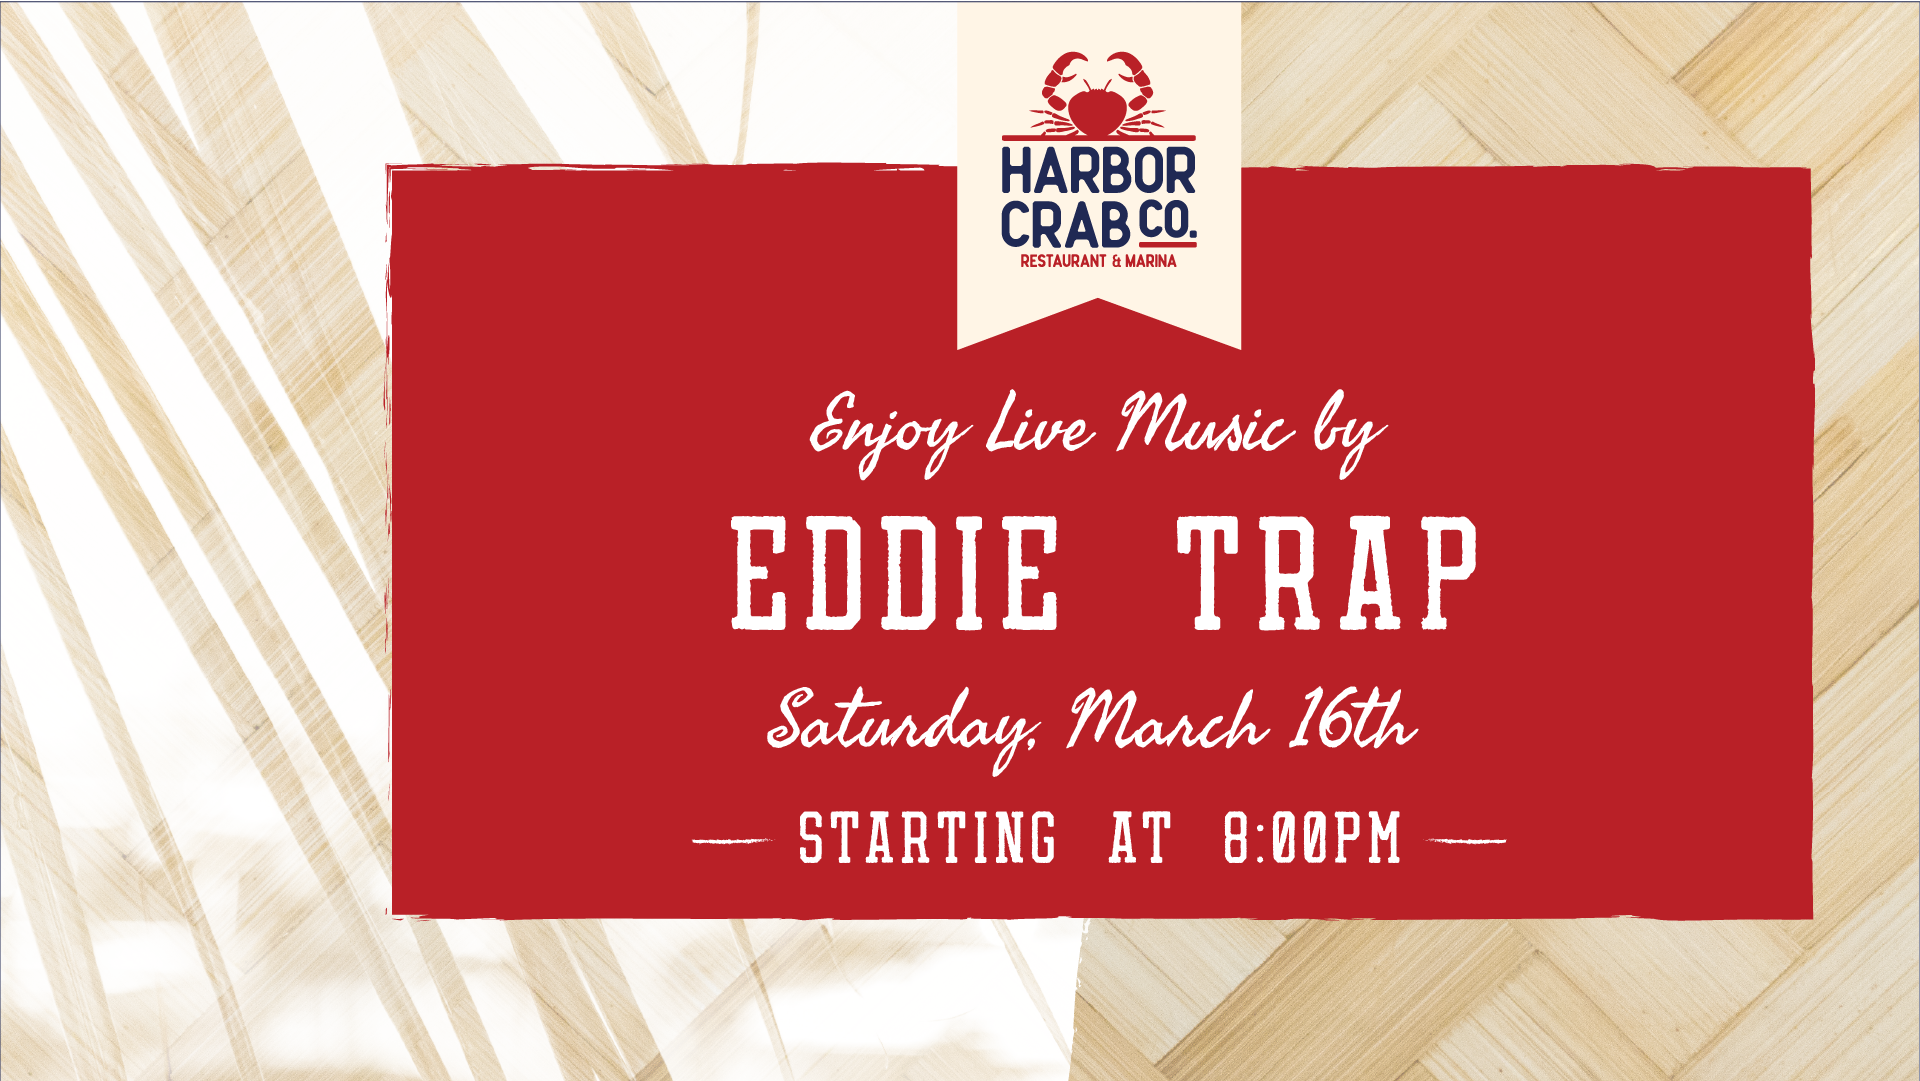 Advertisement for Eddie Trap's live music performance at Harbor Crab on Saturday, March 16th, starting at 8:00 PM.